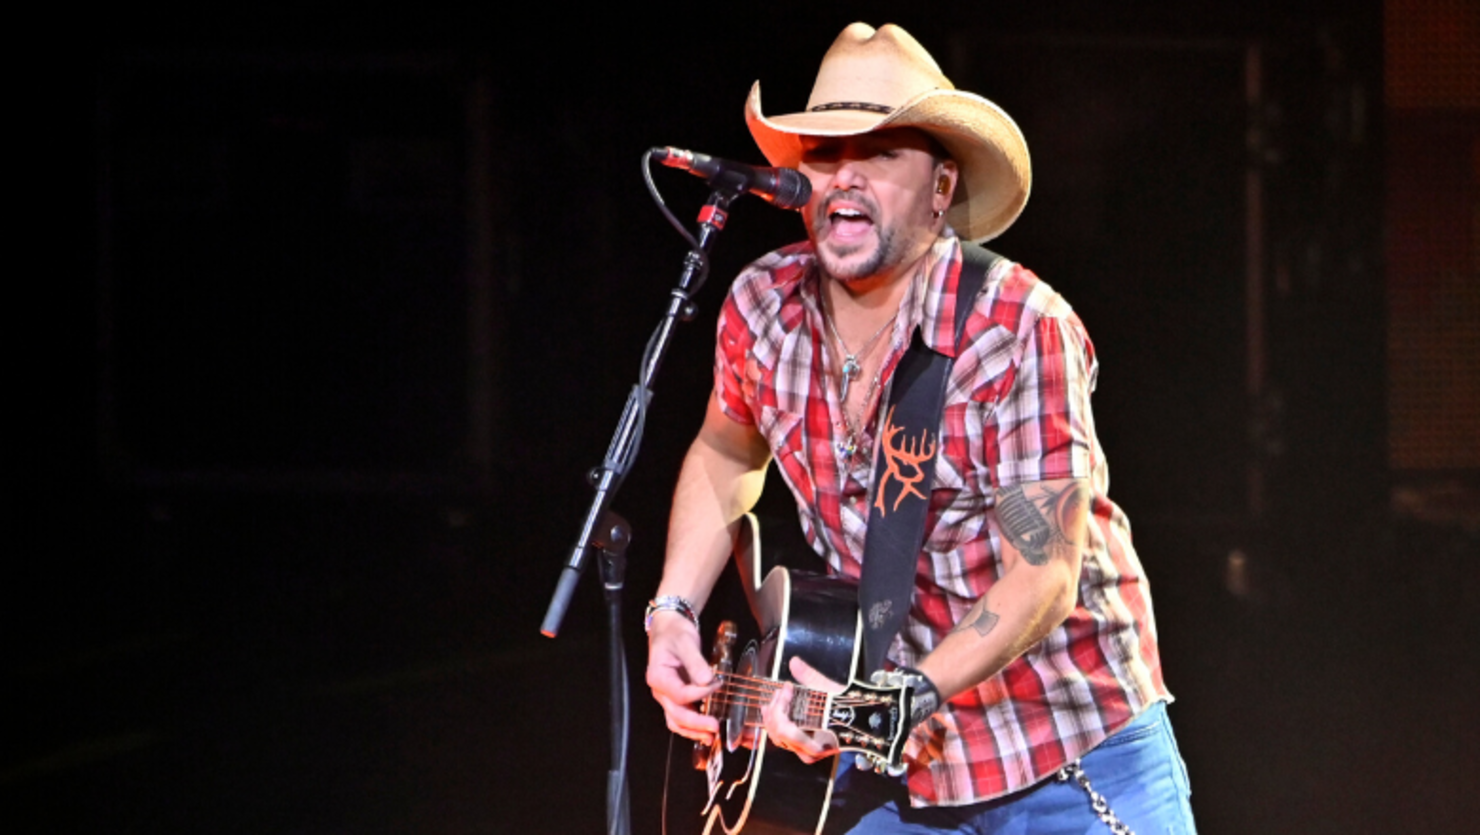 Jason Aldean Shares Behind The Scenes Tour Rehearsal Video With Son Memphis